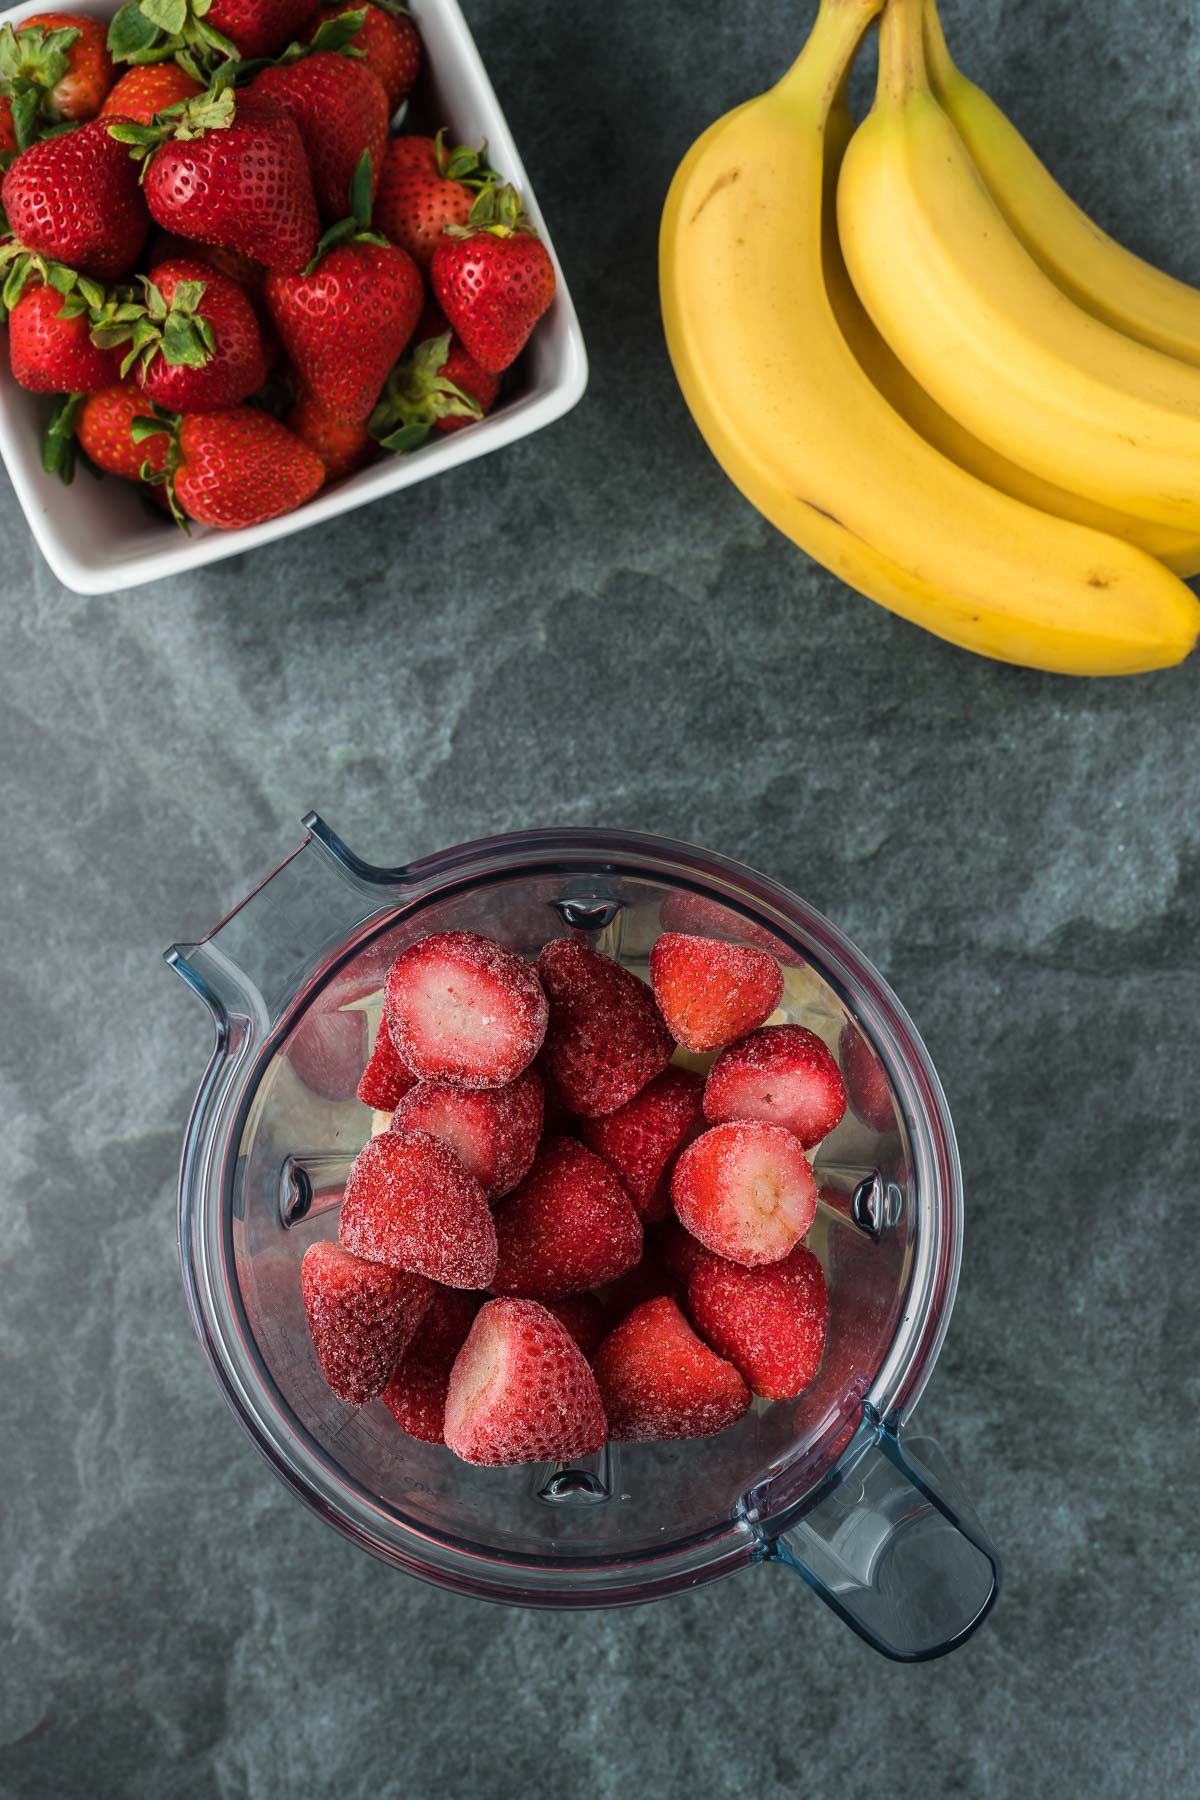 Strawberries in a blender with whole bananas